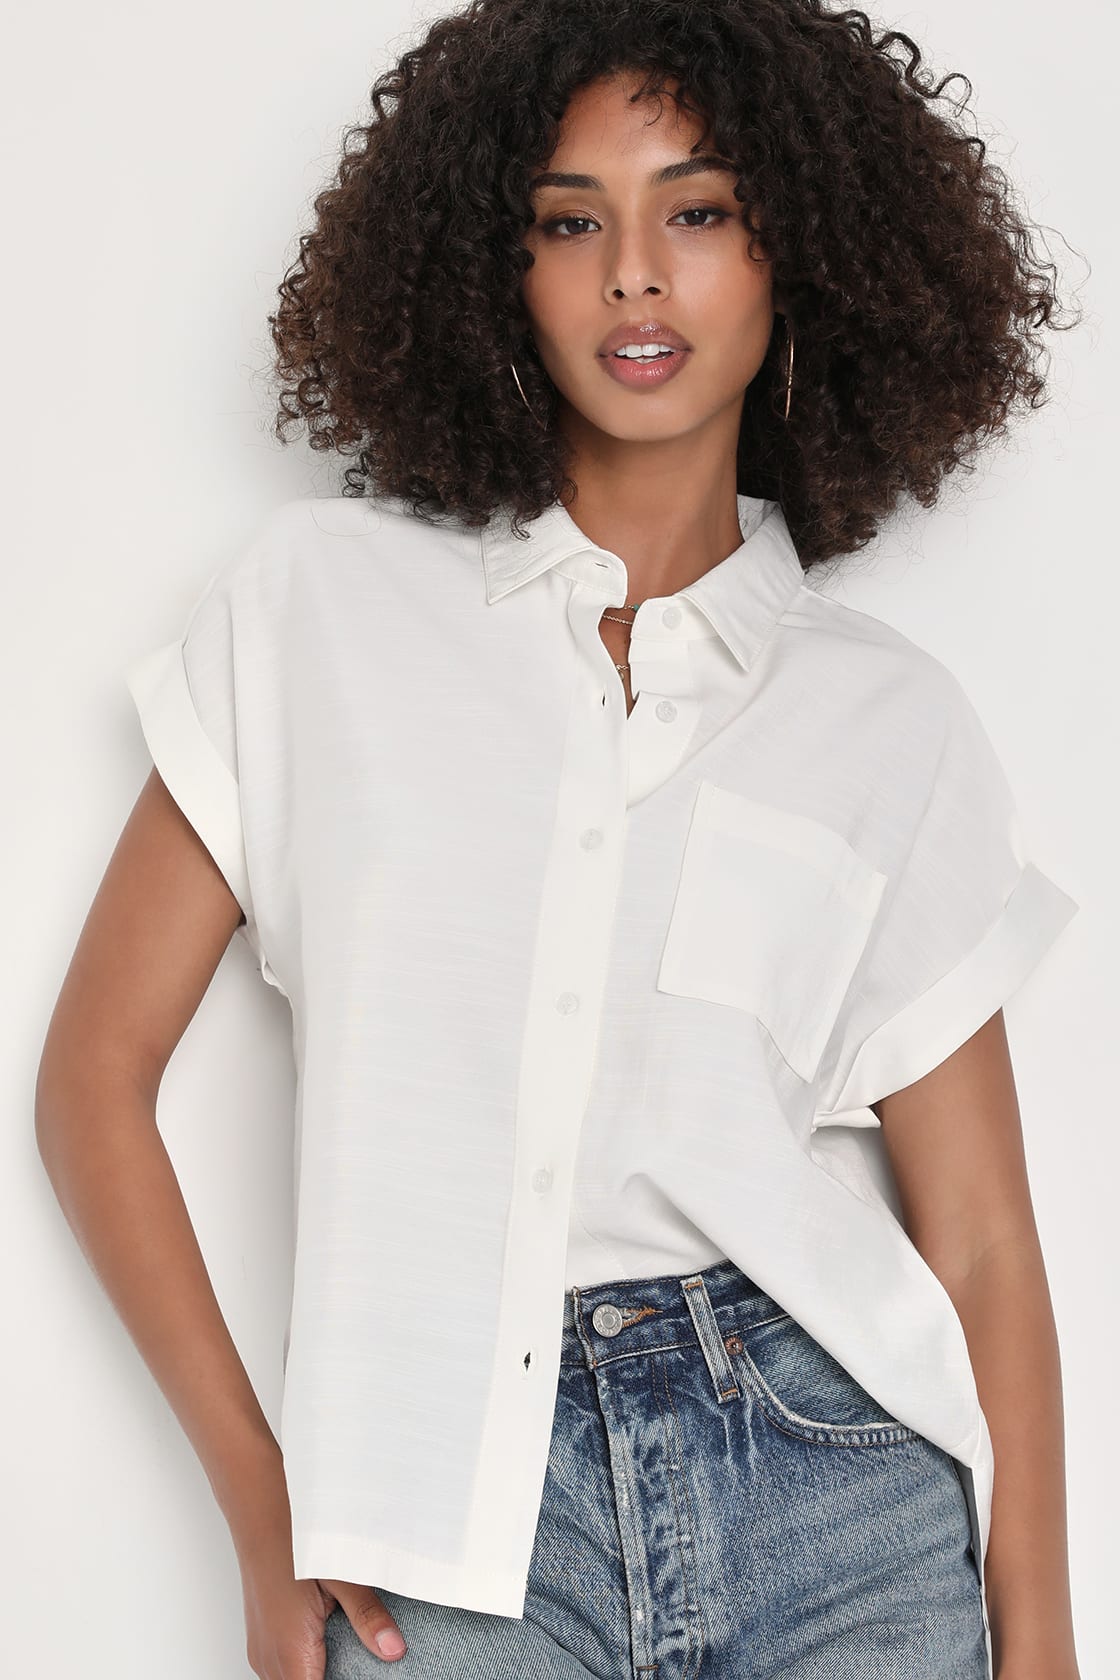 Chic White Top - Button-Up Top - Short Sleeve Top - Notched Top - Lulus